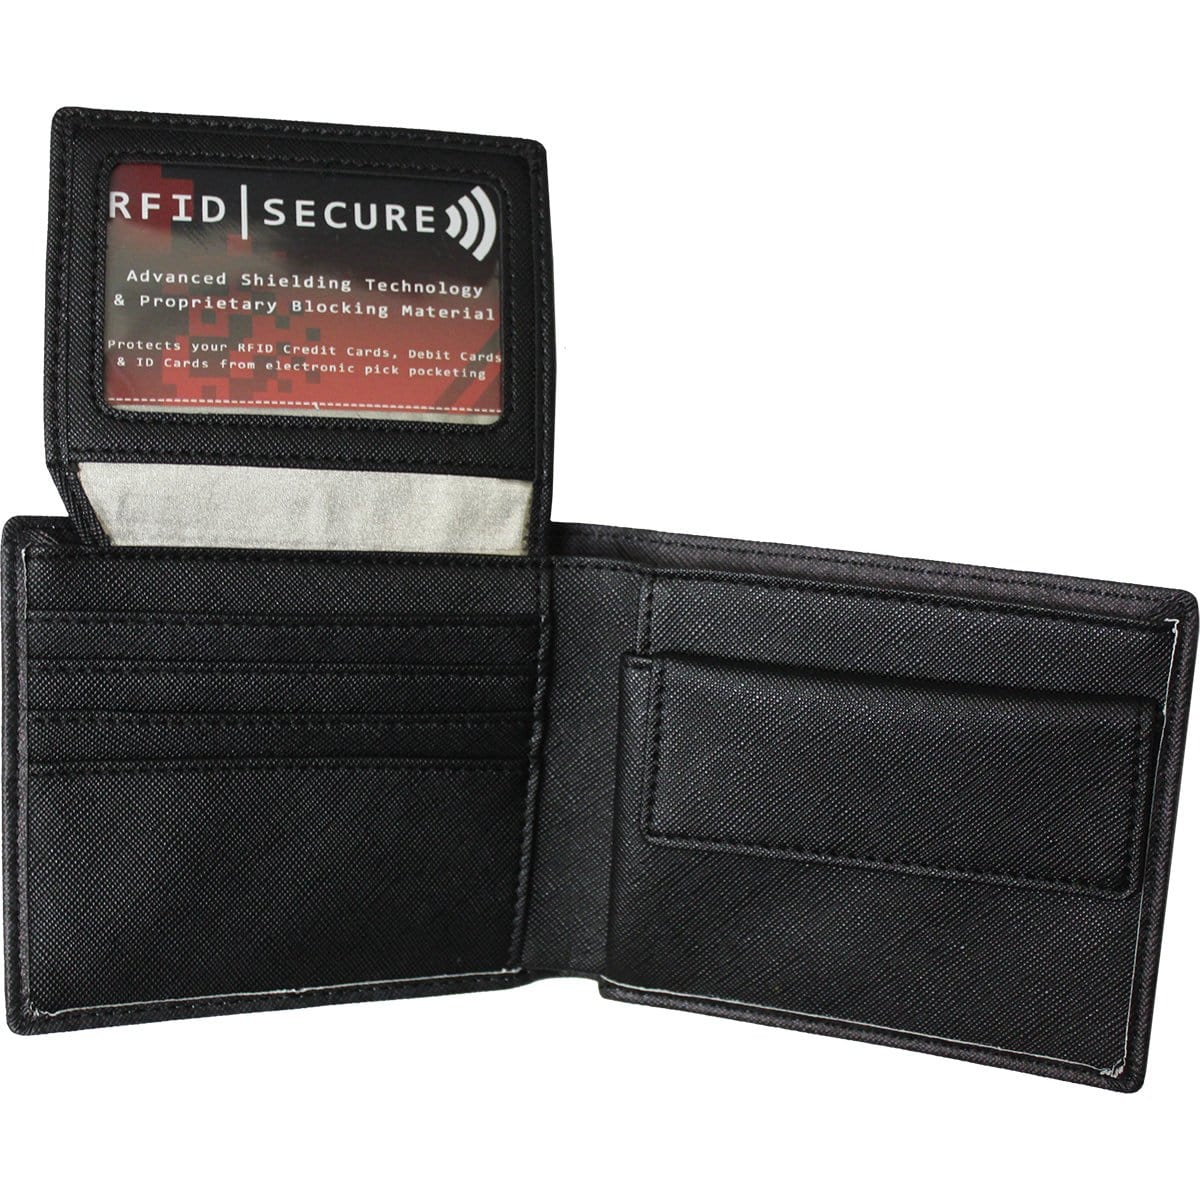 SKULL SCROLL - BiFold Wallet with RFID Blocking and Gift Box - Spiral USA